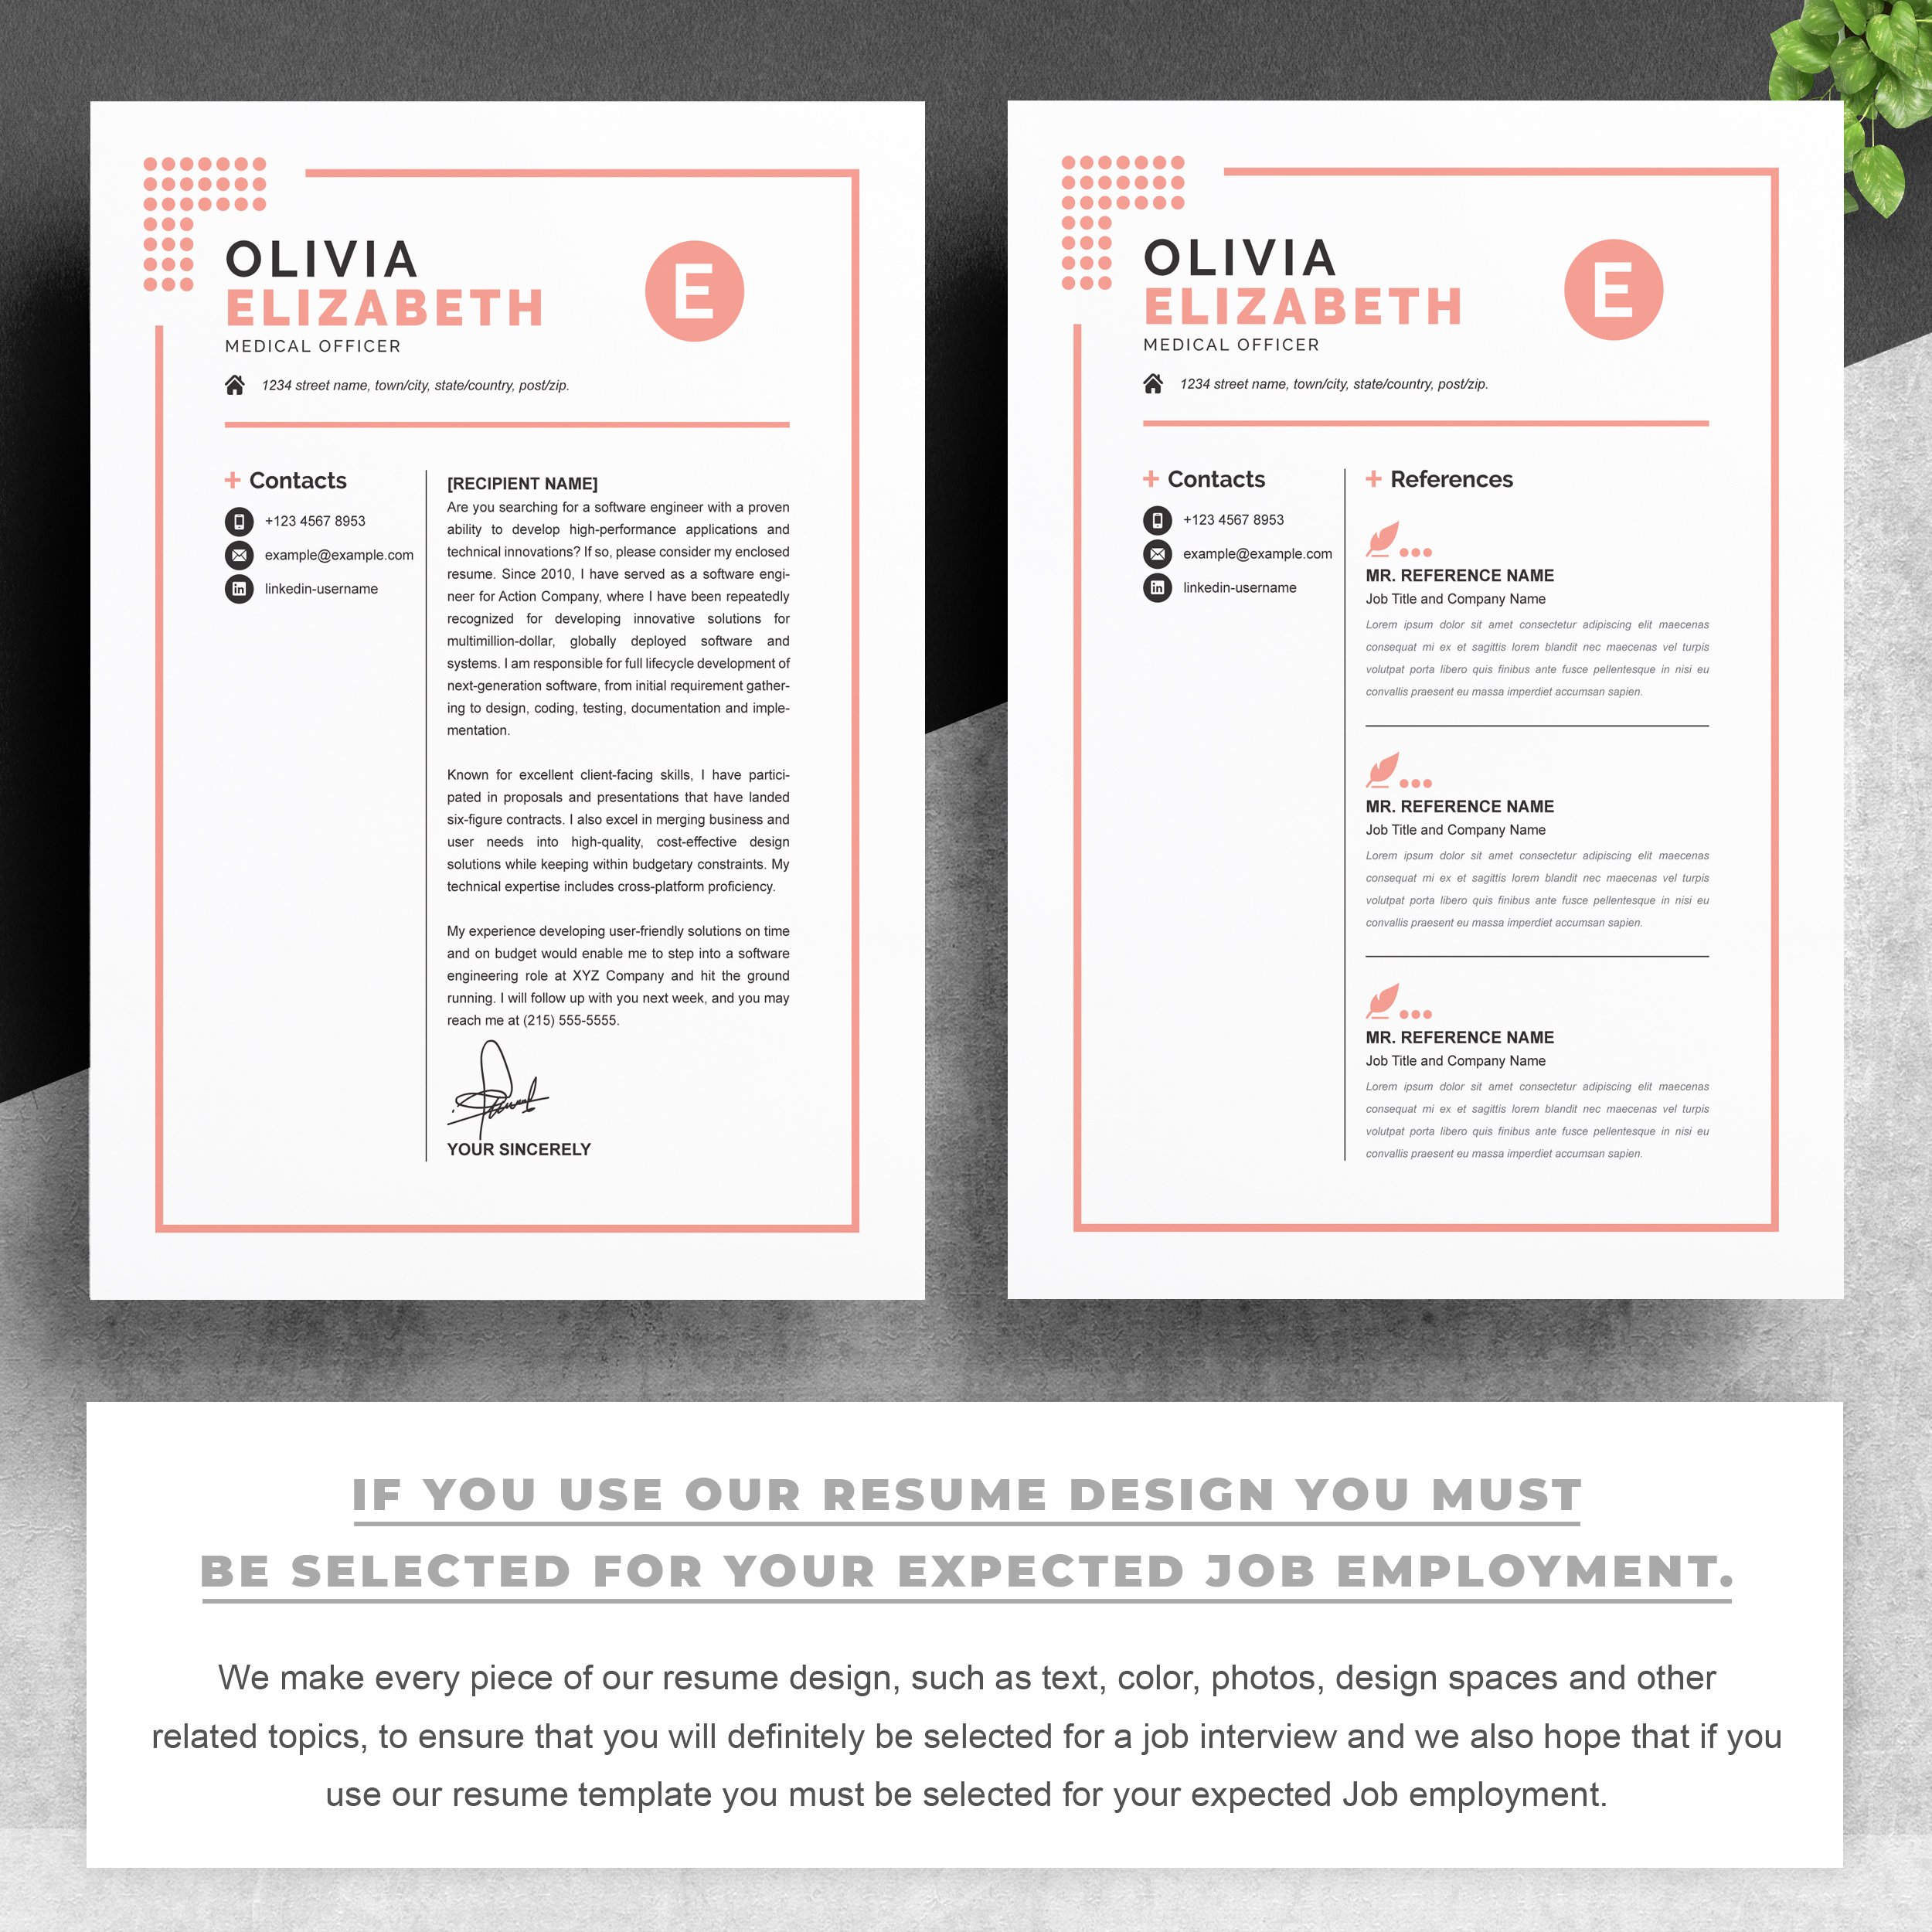 03 2 pages free resume design template copy 952